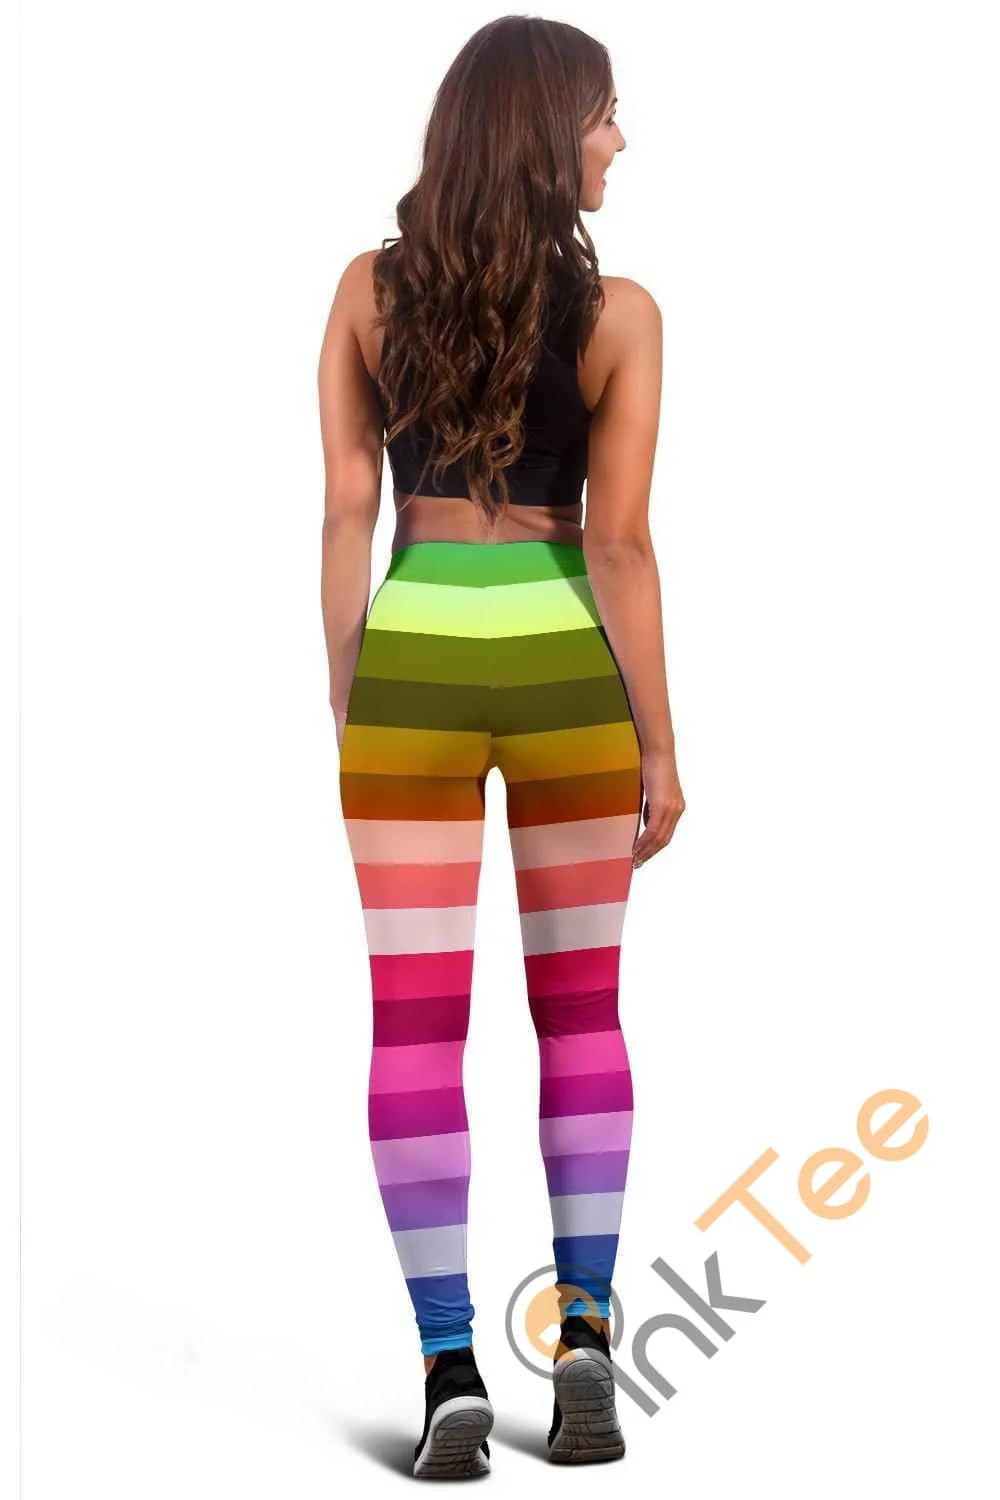 Everyone's Rainbow 3D All Over Print For Yoga Fitness Women's Leggings